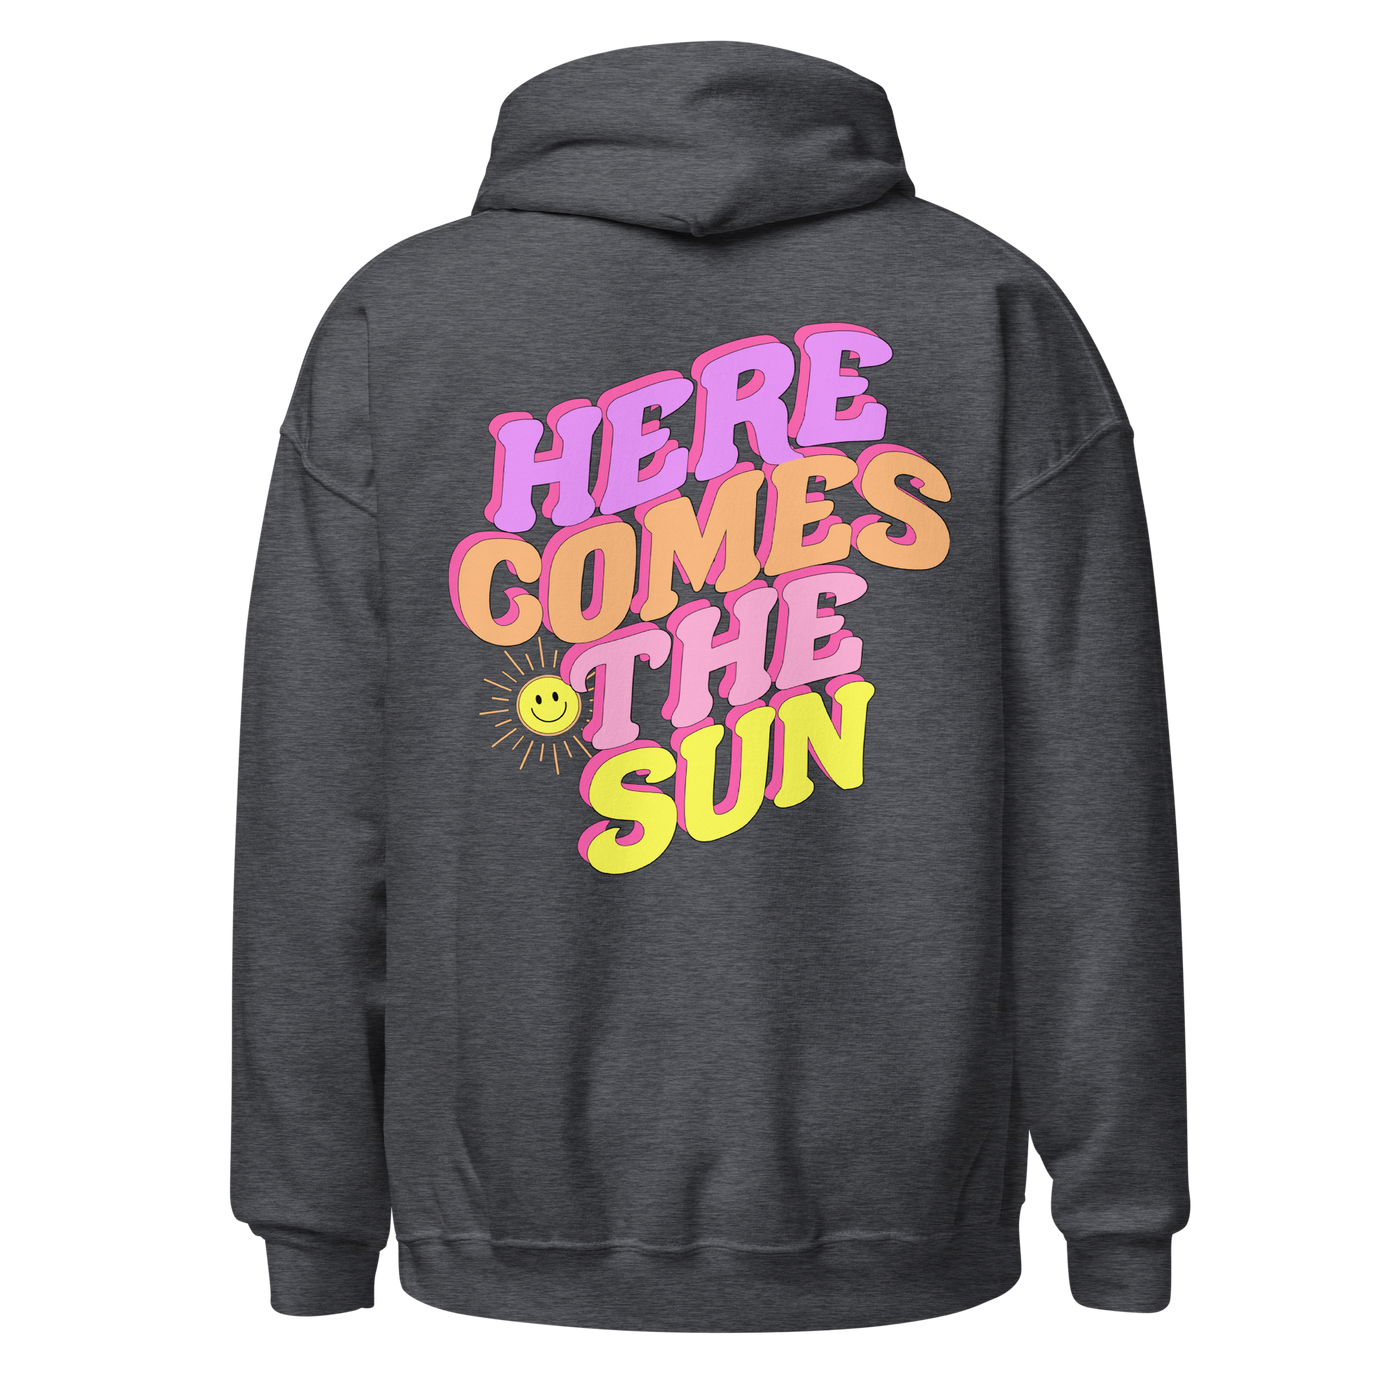 Make It Yours™ 'Here Comes The Sun' Front & Back Hoodie